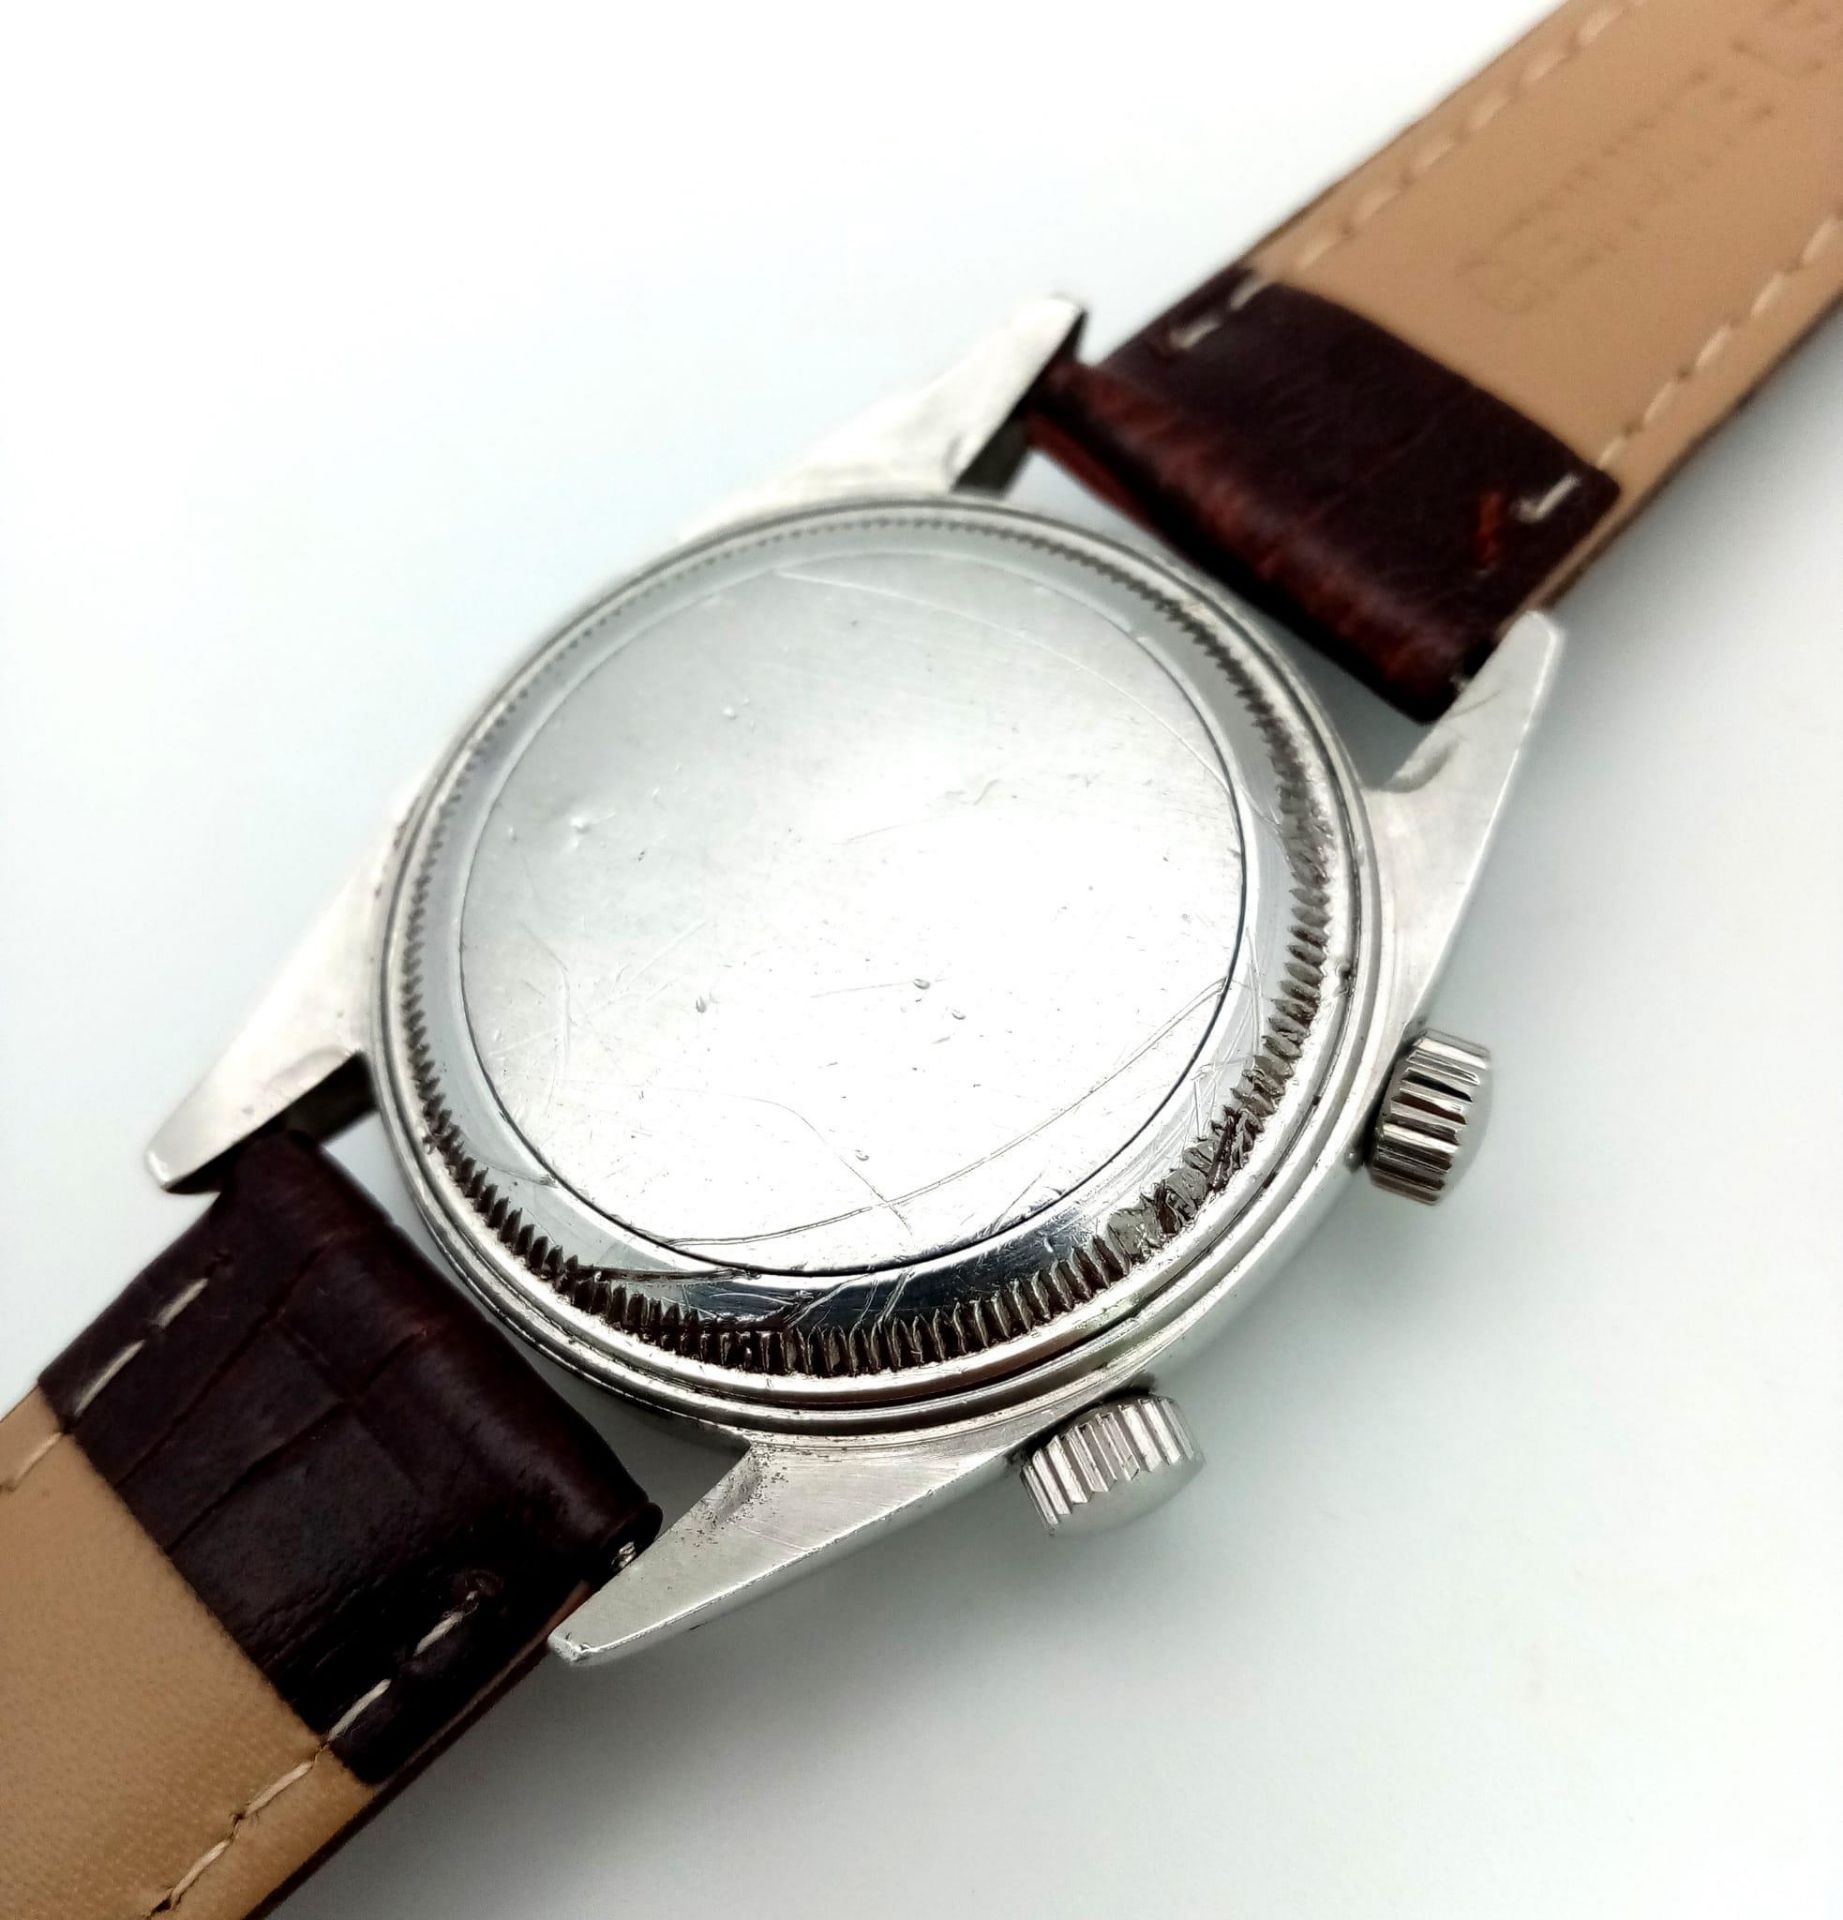 A Very Rare (1950s) Tudor Advisor Alarm Gents Watch. Brown leather strap. Steel case - 34mm. Gilt - Image 5 of 5